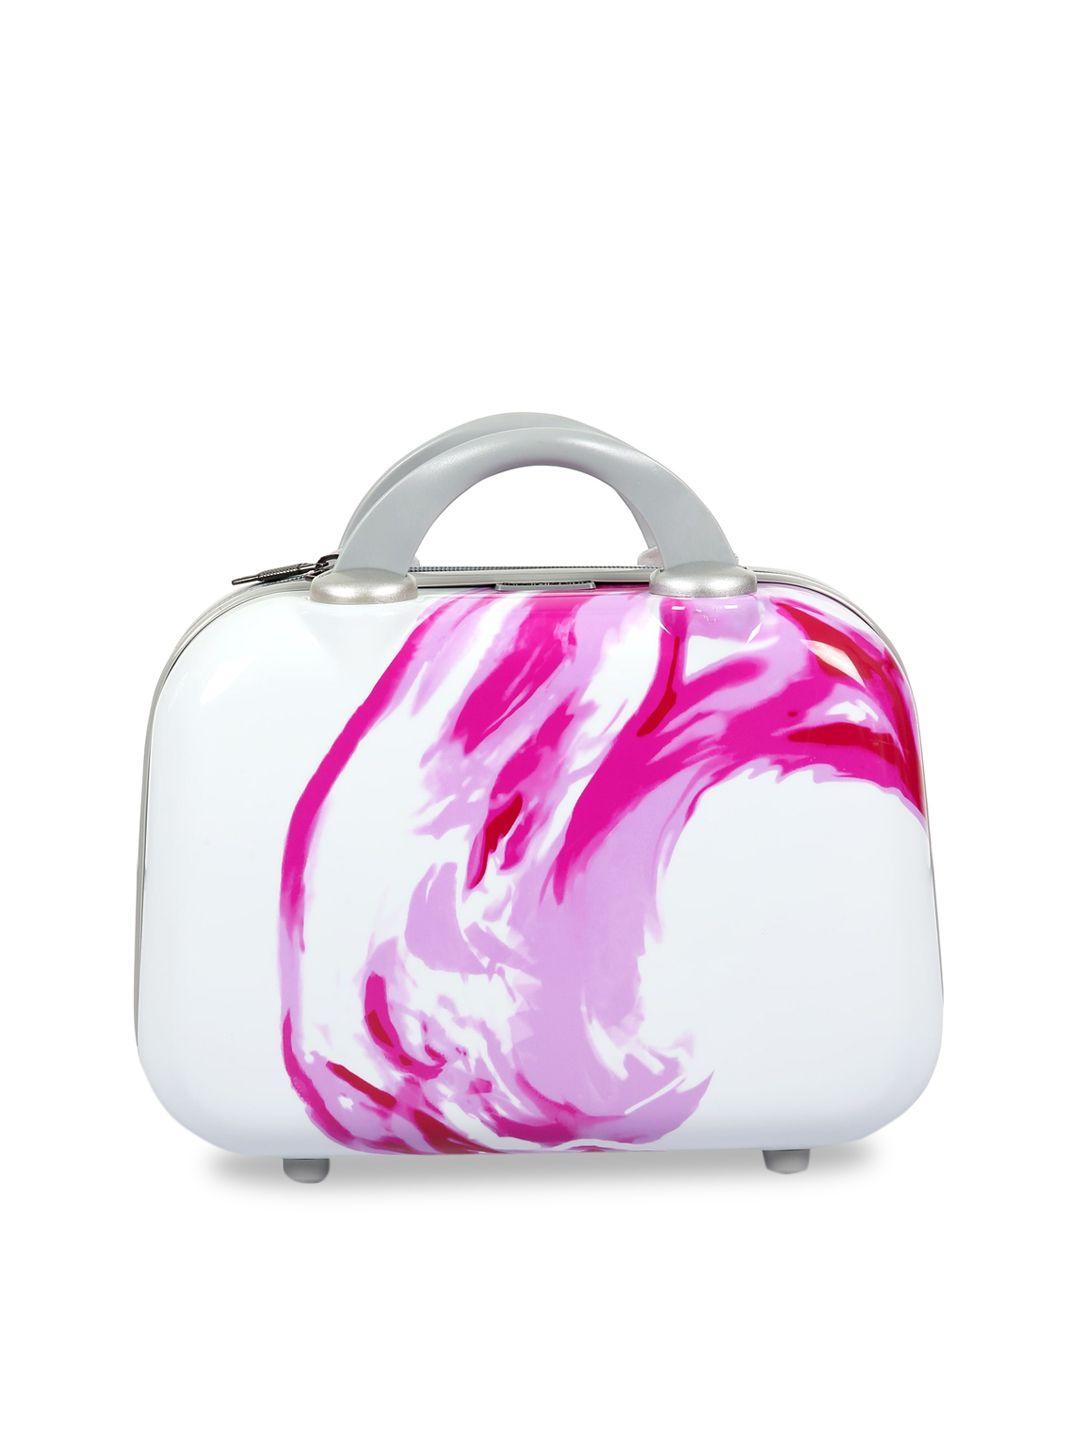 polo class unisex pink & white printed vanity cabin trolley bags